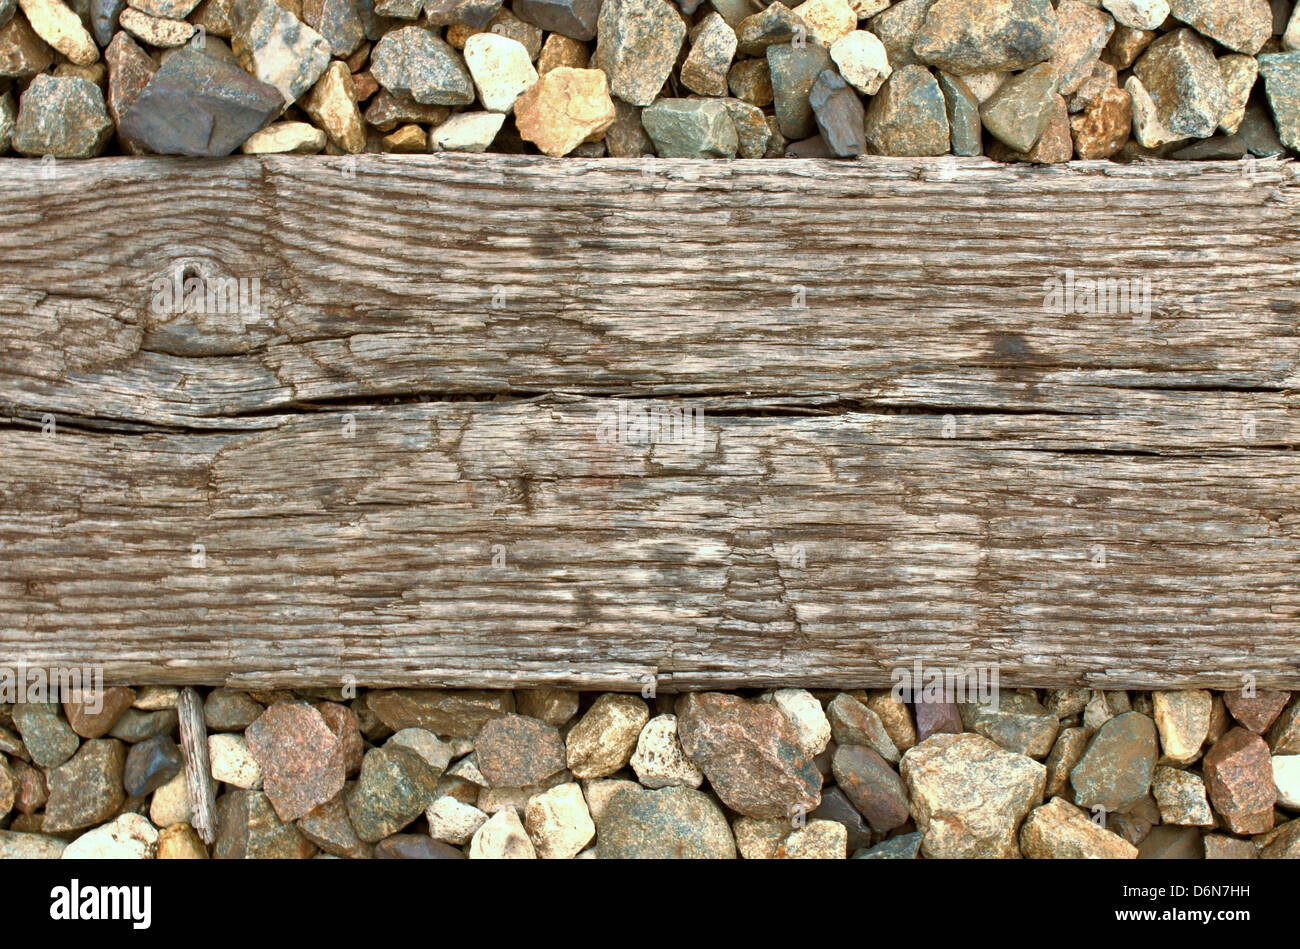 Rocks with wood banner. Stock Photo